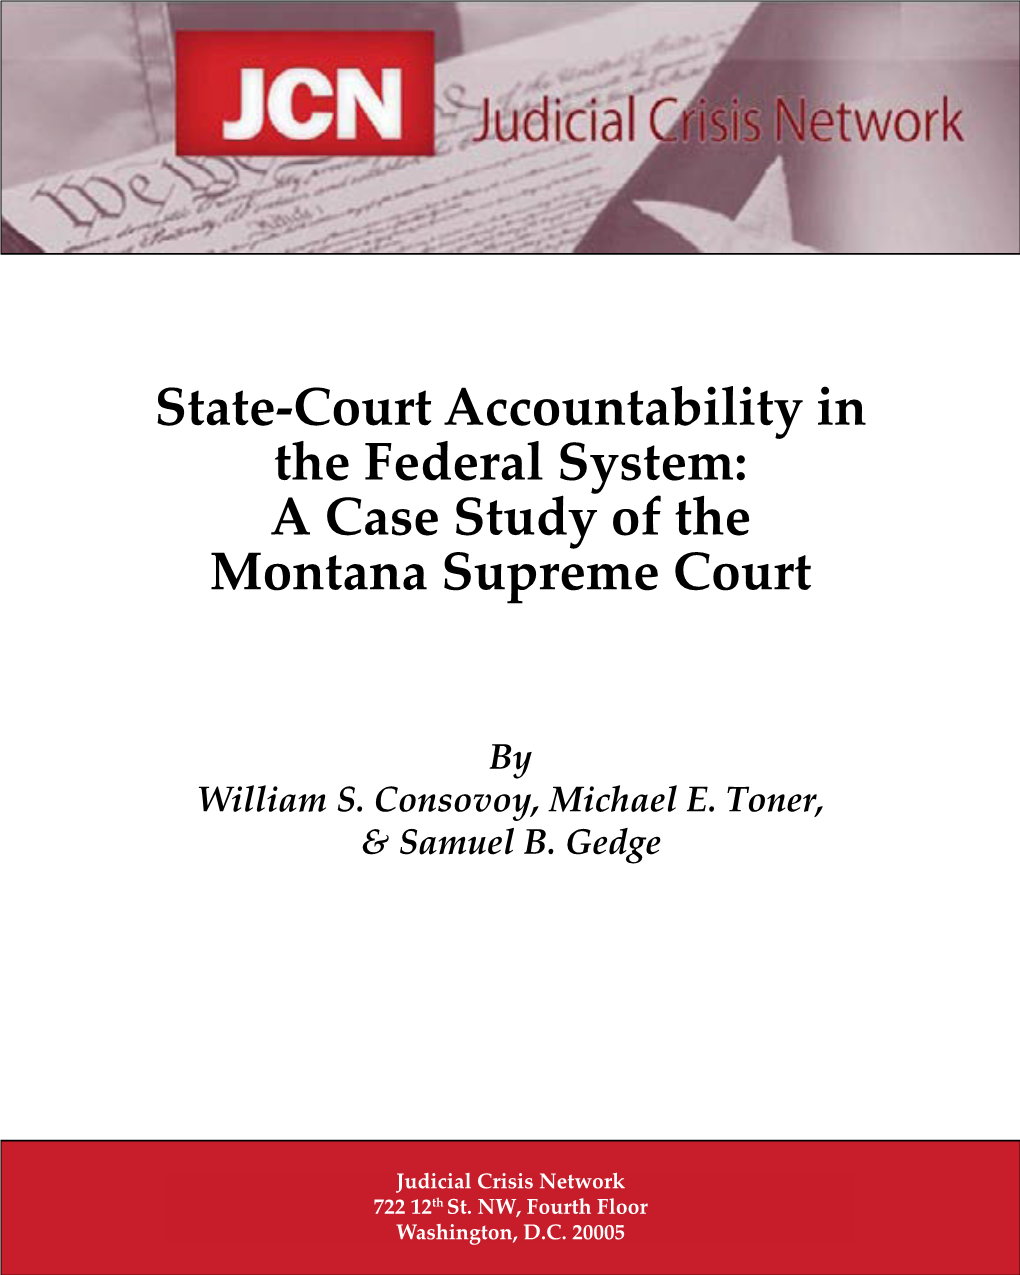 A Case Study of the Montana Supreme Court